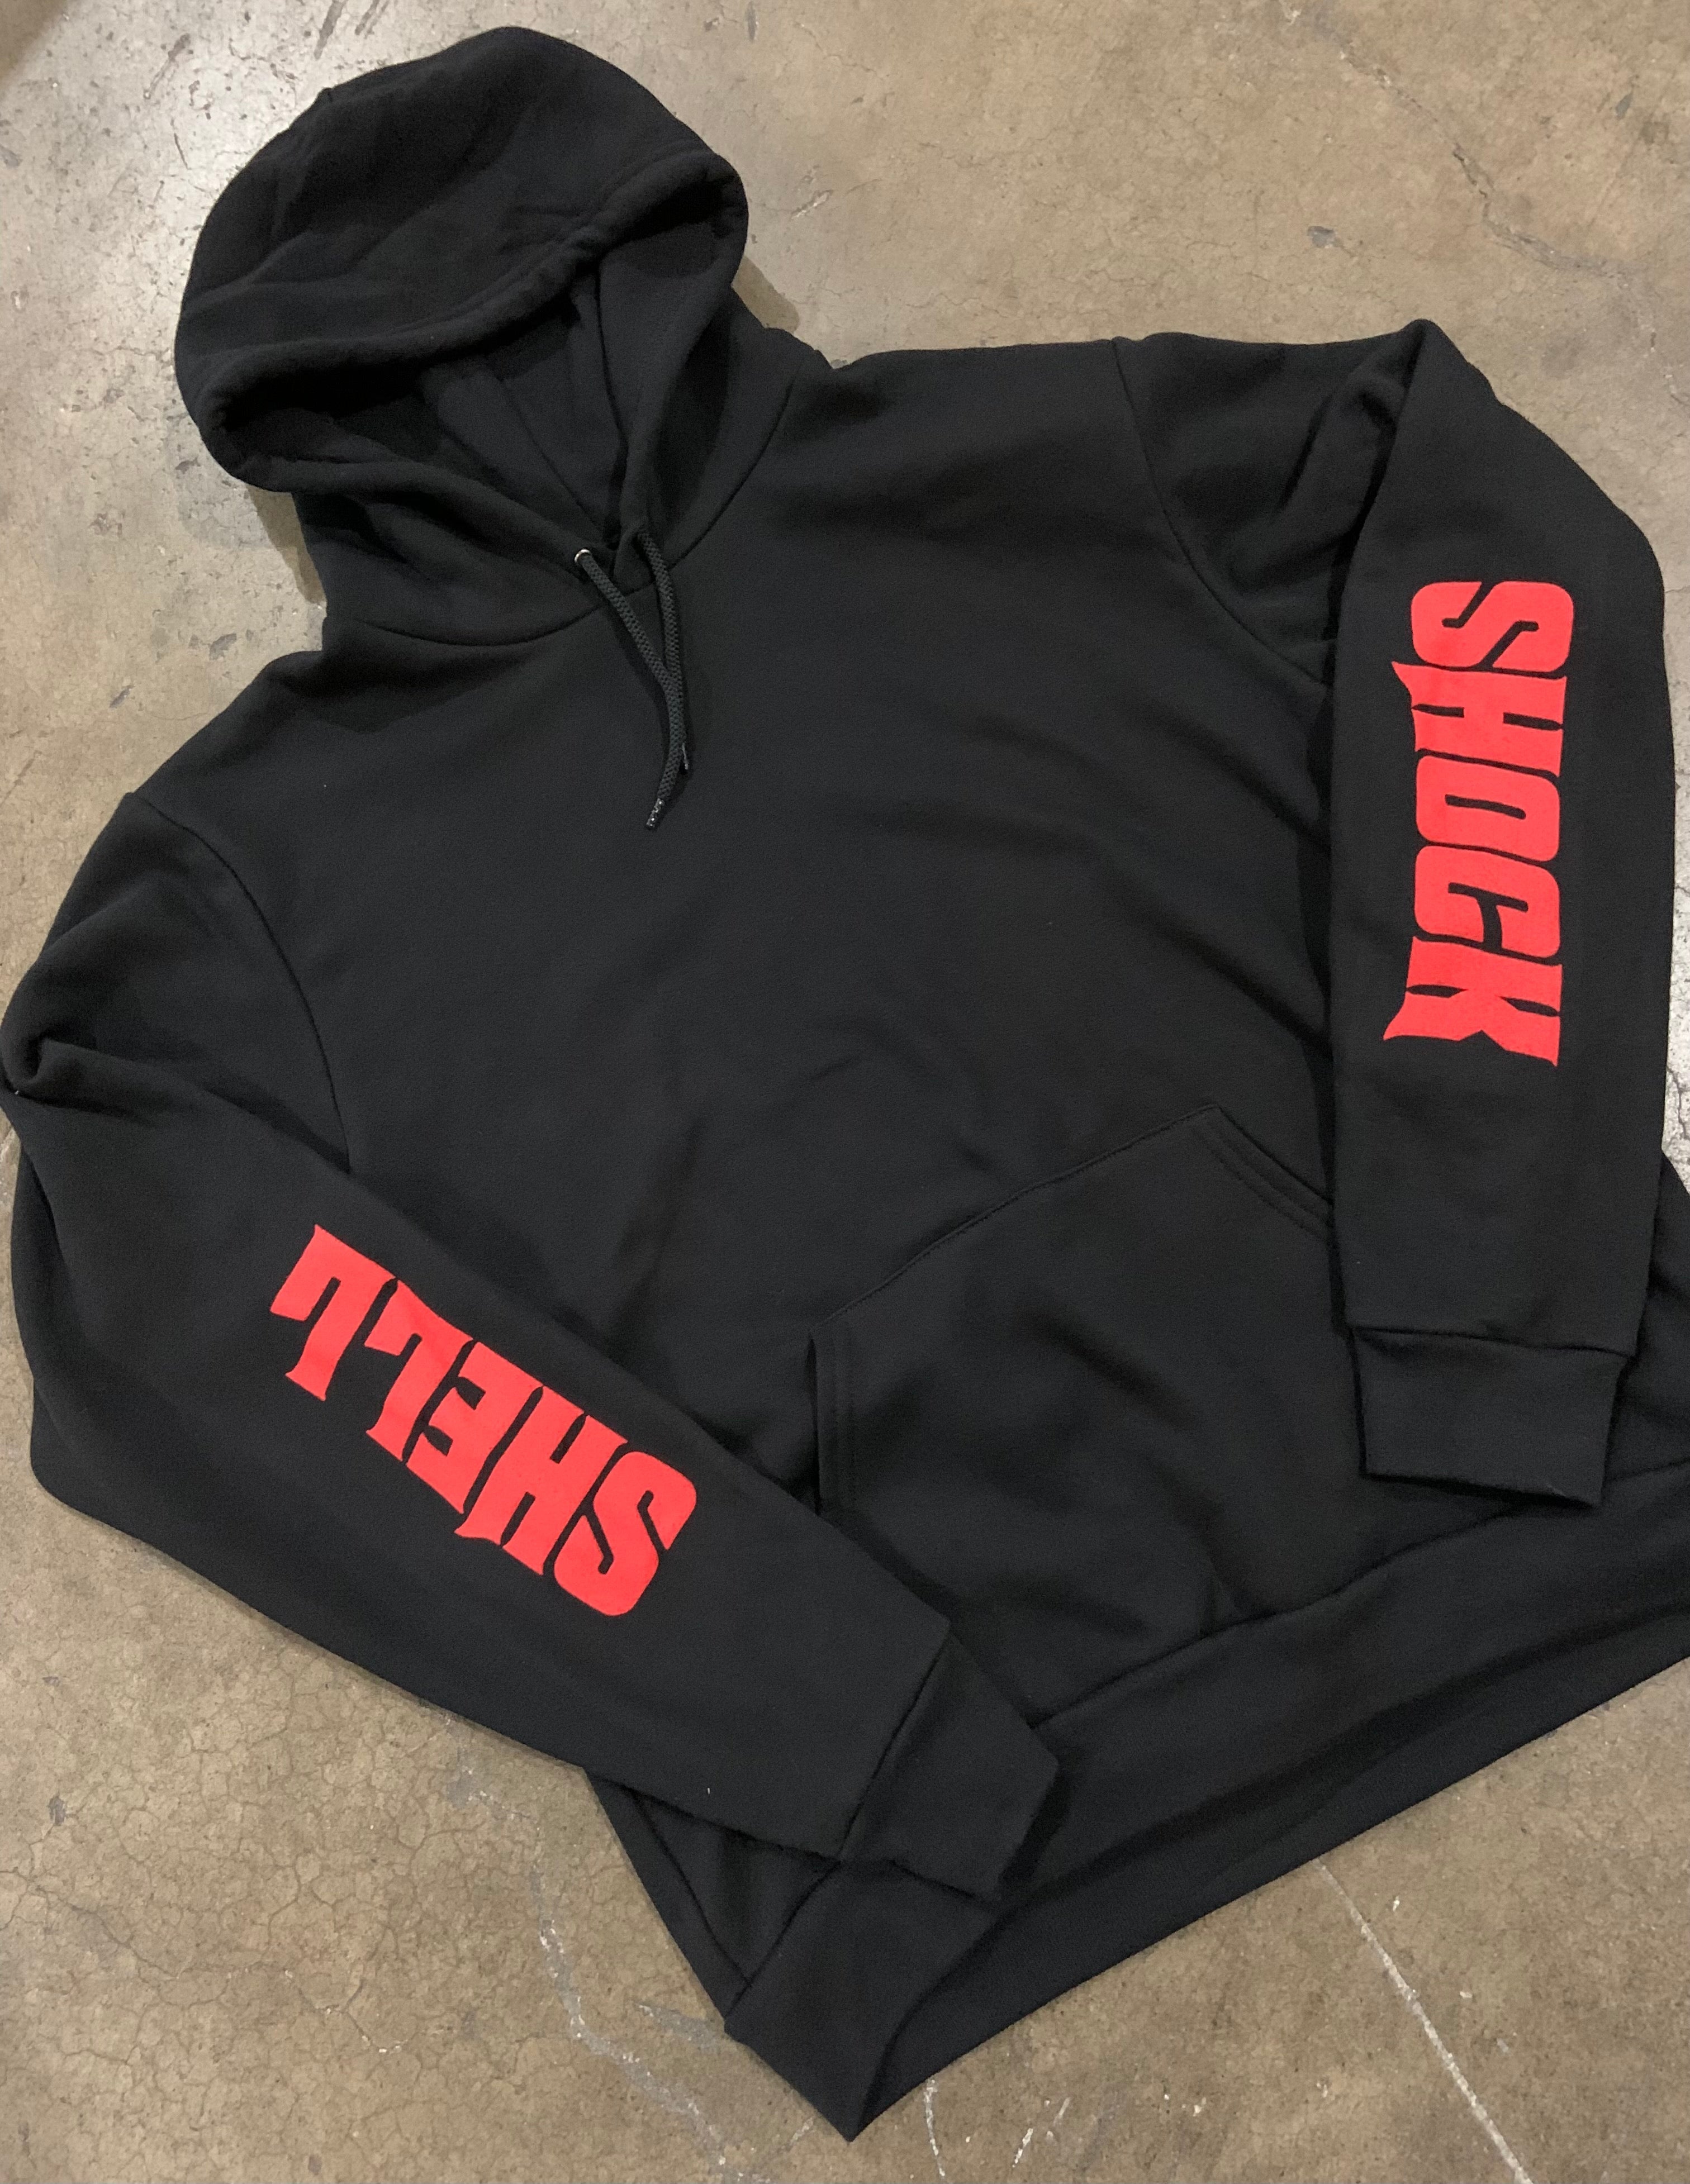 Shell Shock Pullover Hoodie